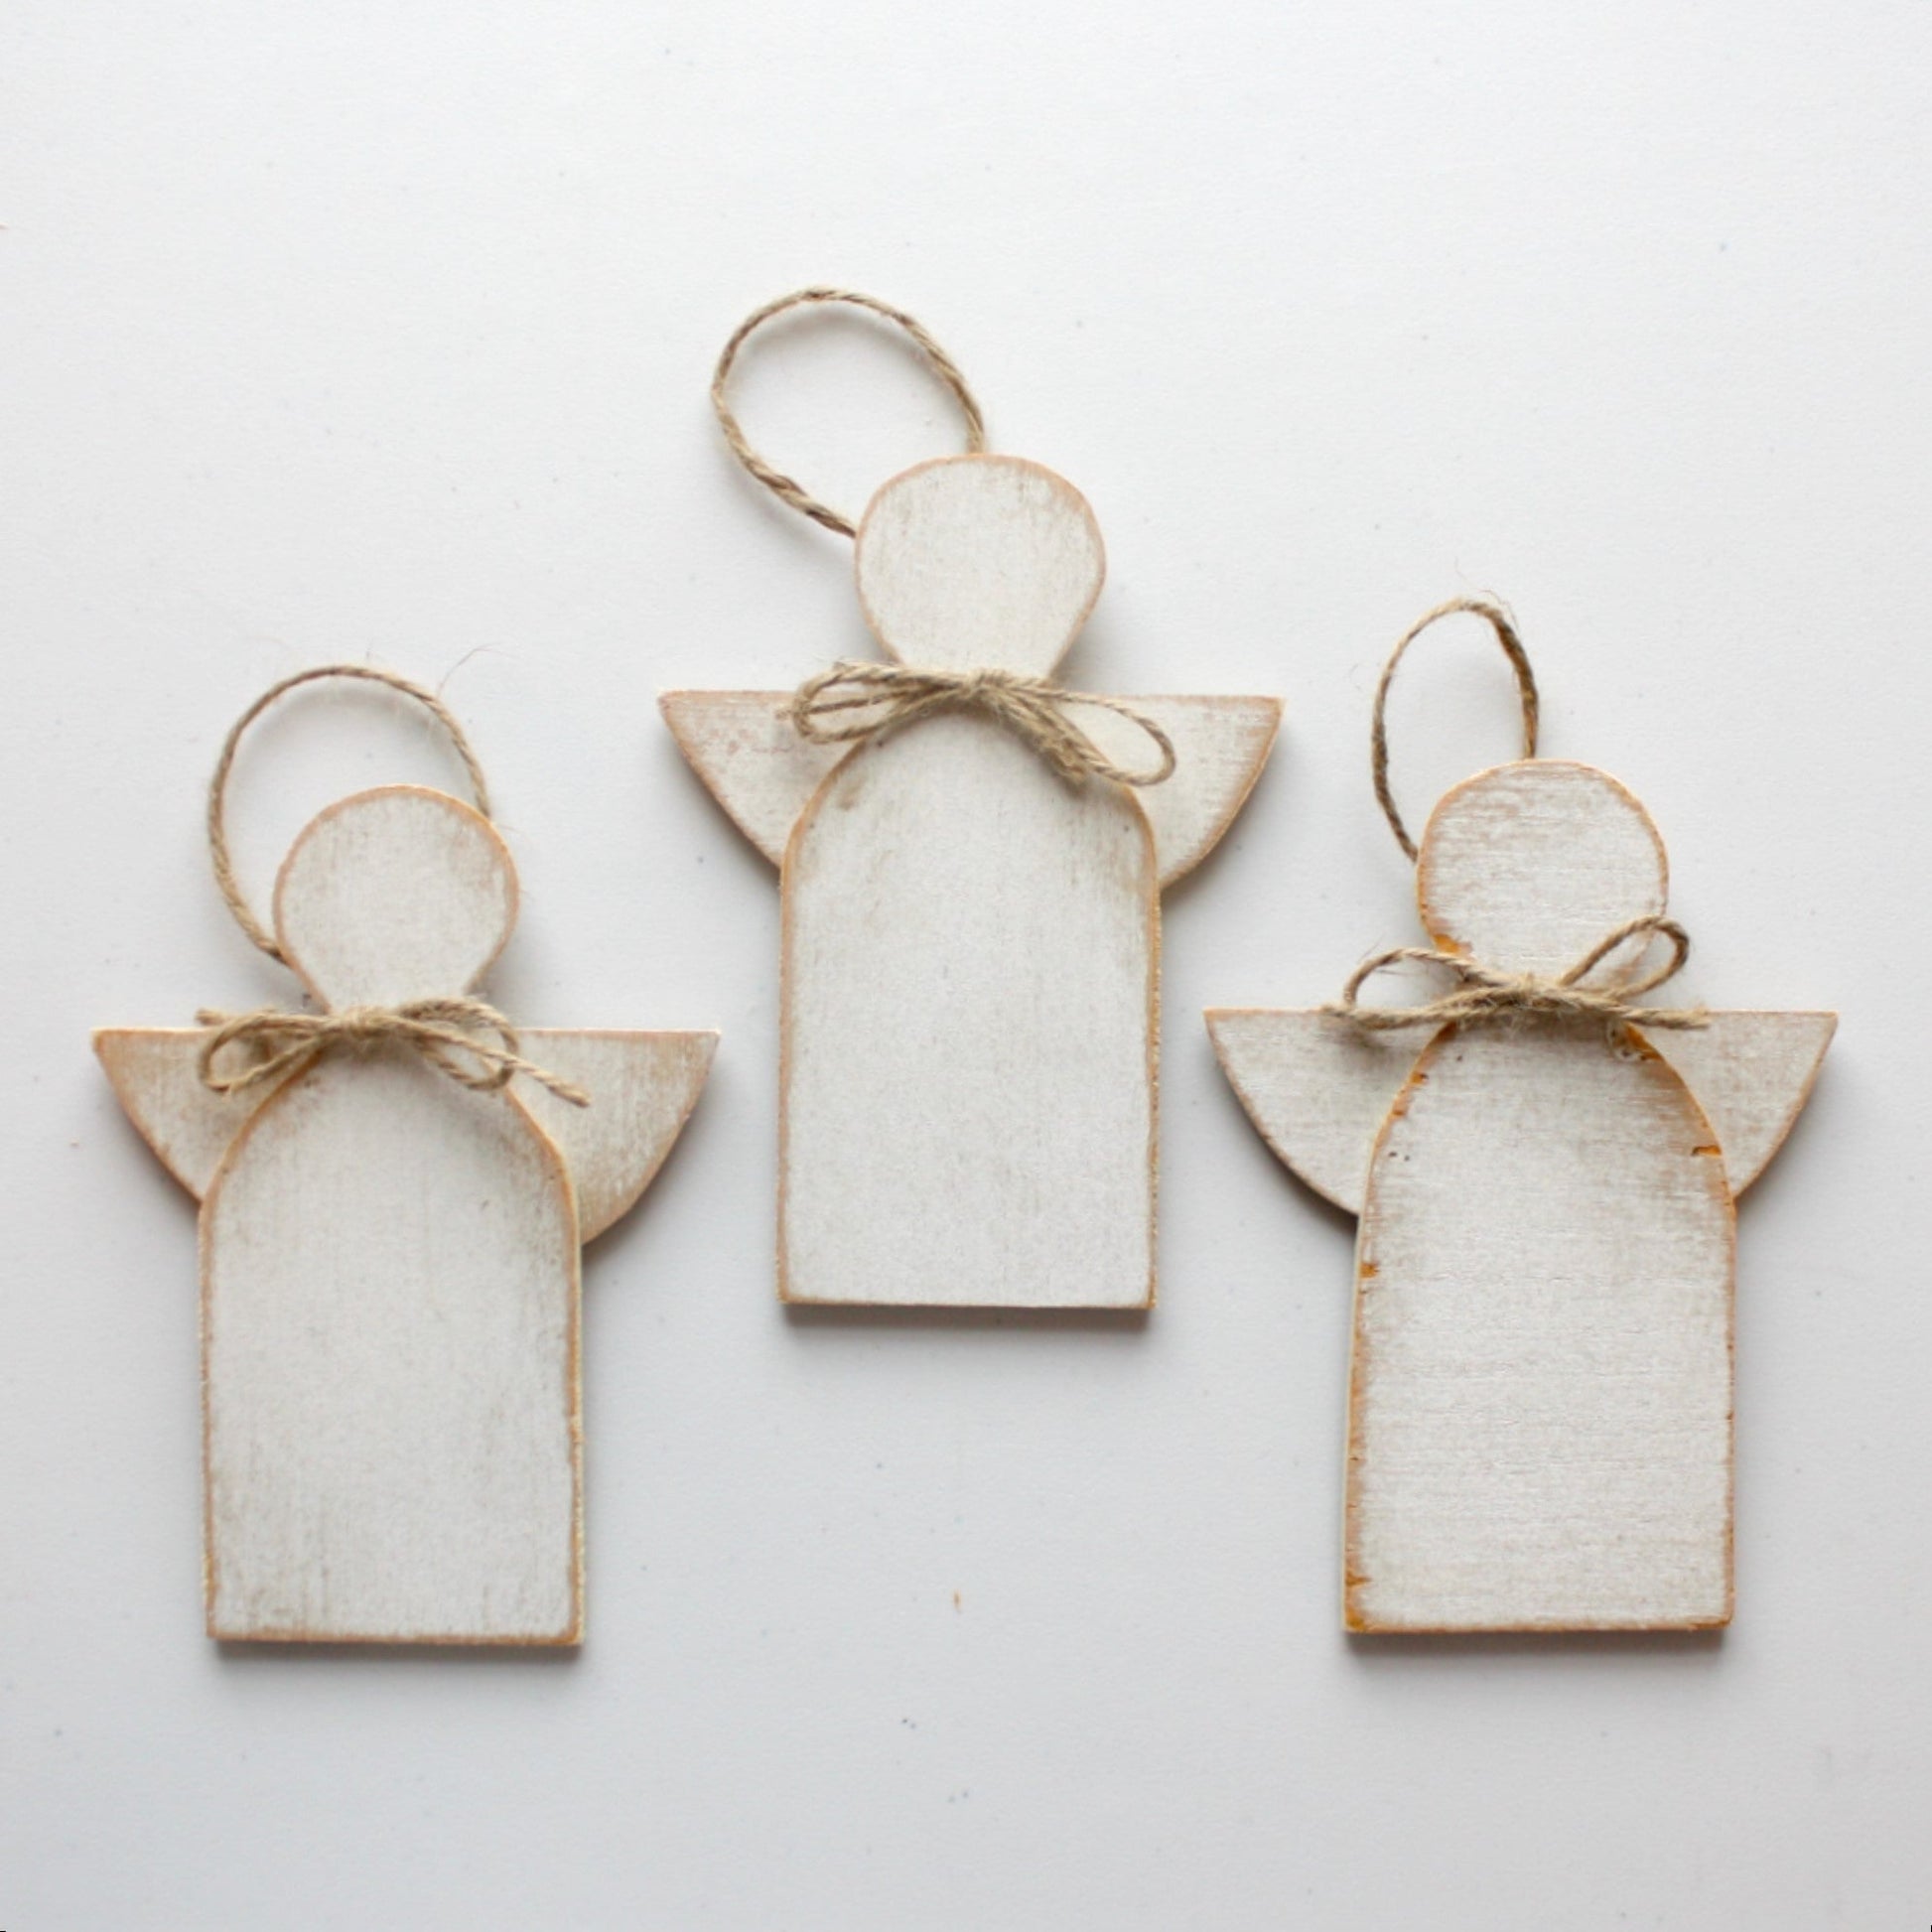 Handmade Wood Angel Ornaments - Made in the USA